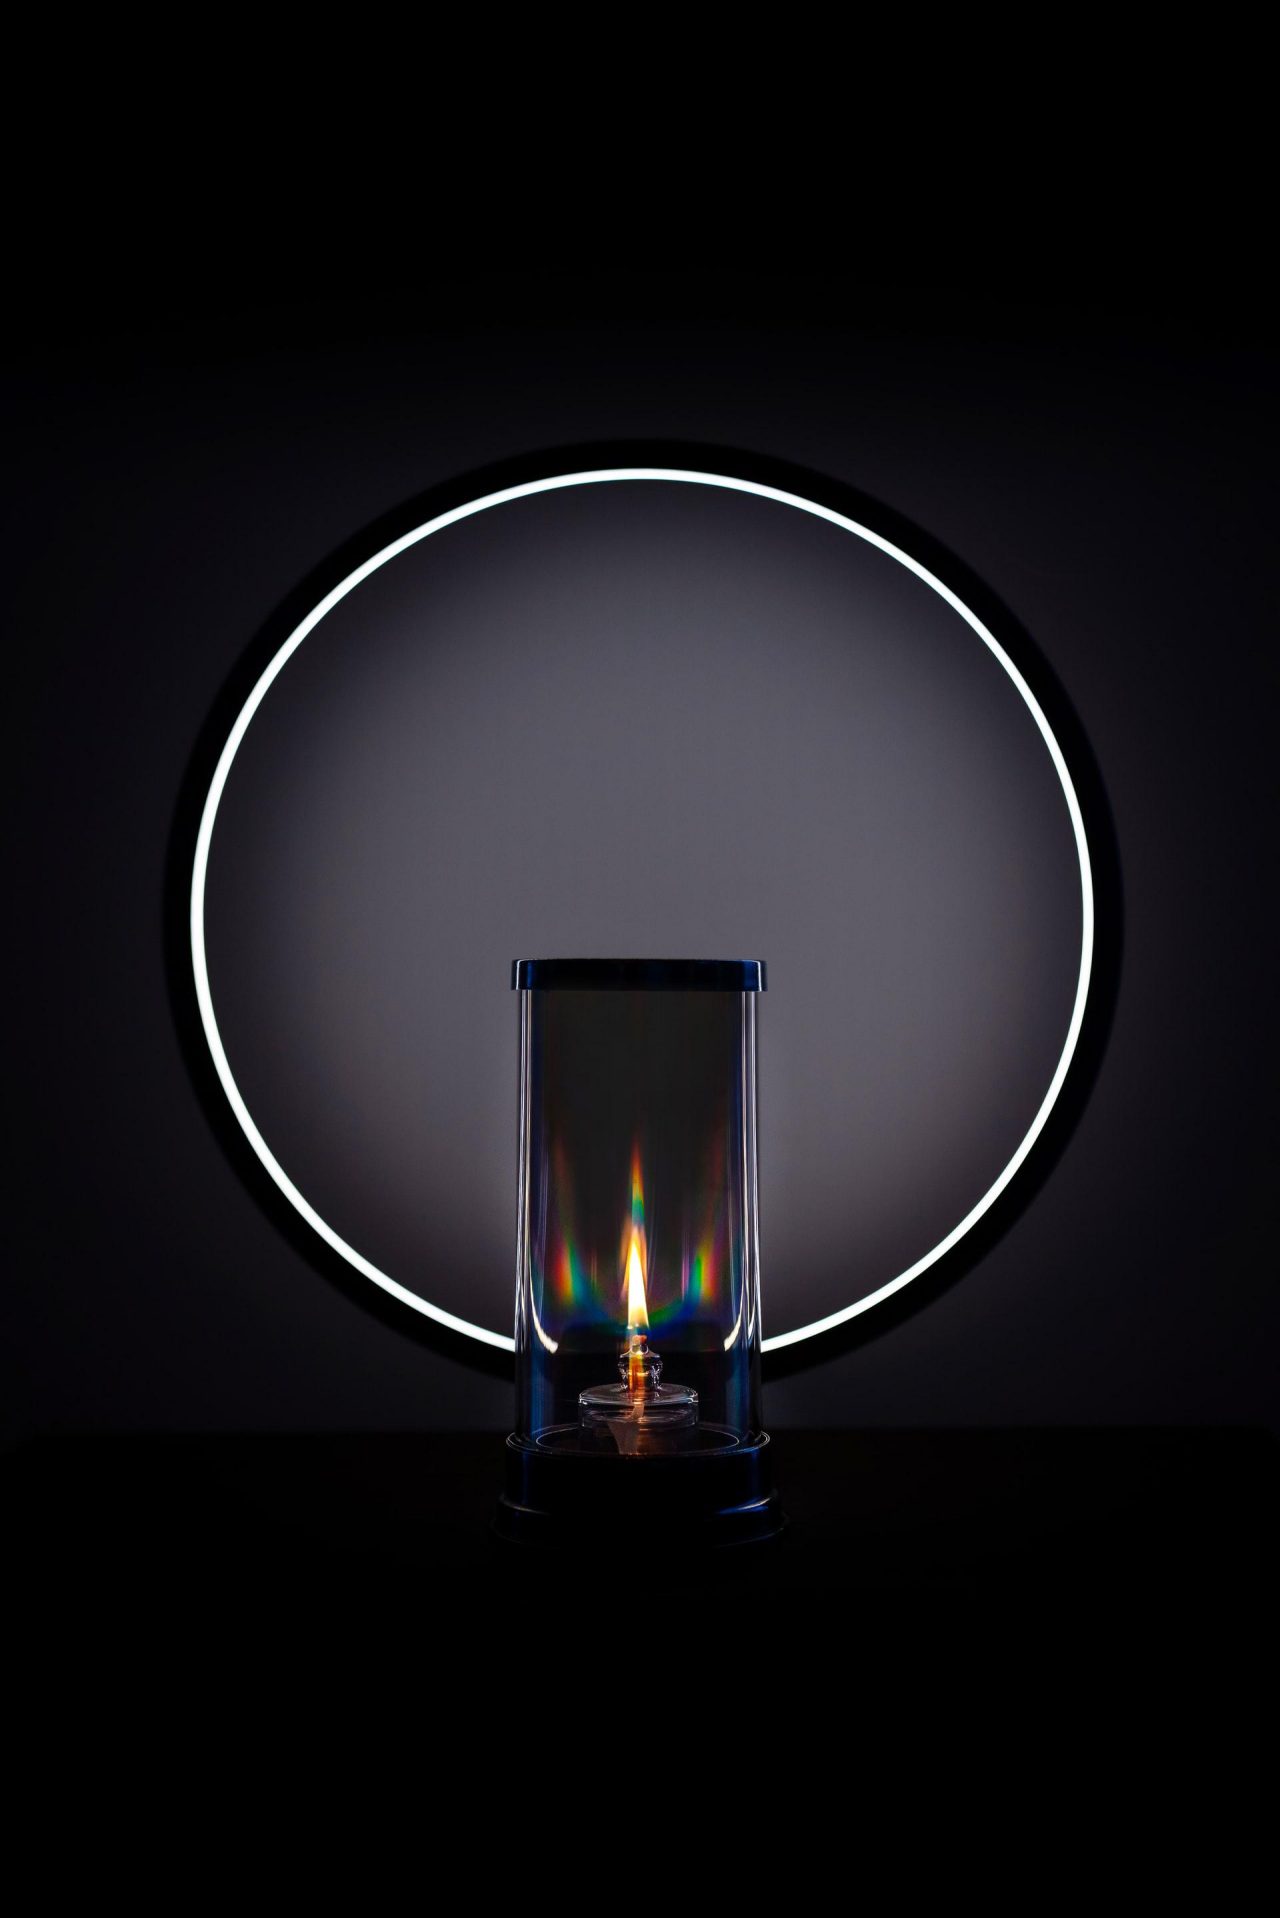 Prismatic oil lamp in front of a modern circular lamp